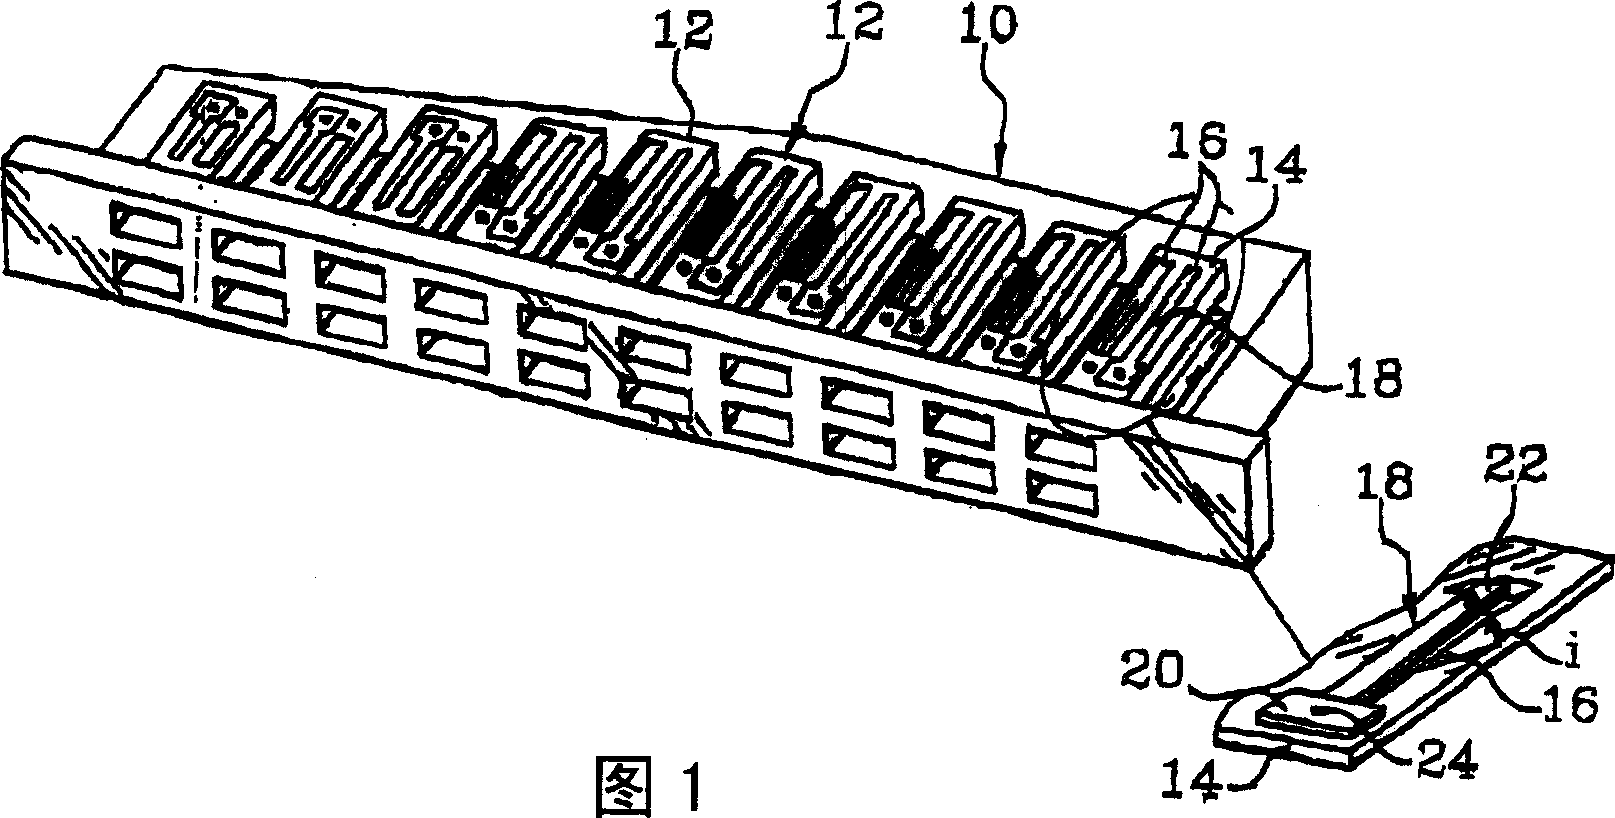 Antithetic and unique spring assembly, in particular used for concertina category musical instruments